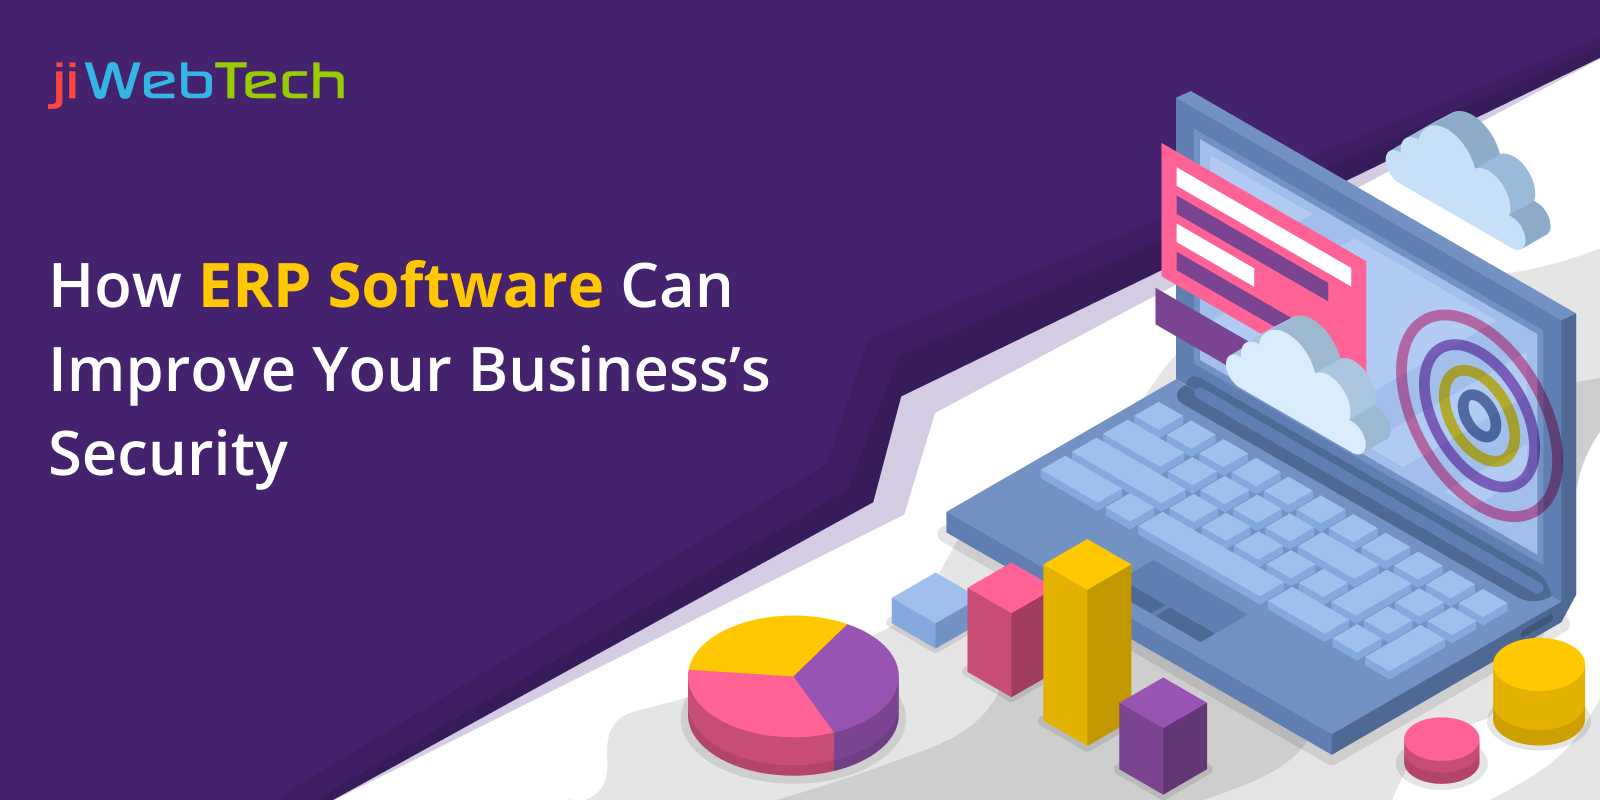 How ERP Software Can Improve Your Business Security?